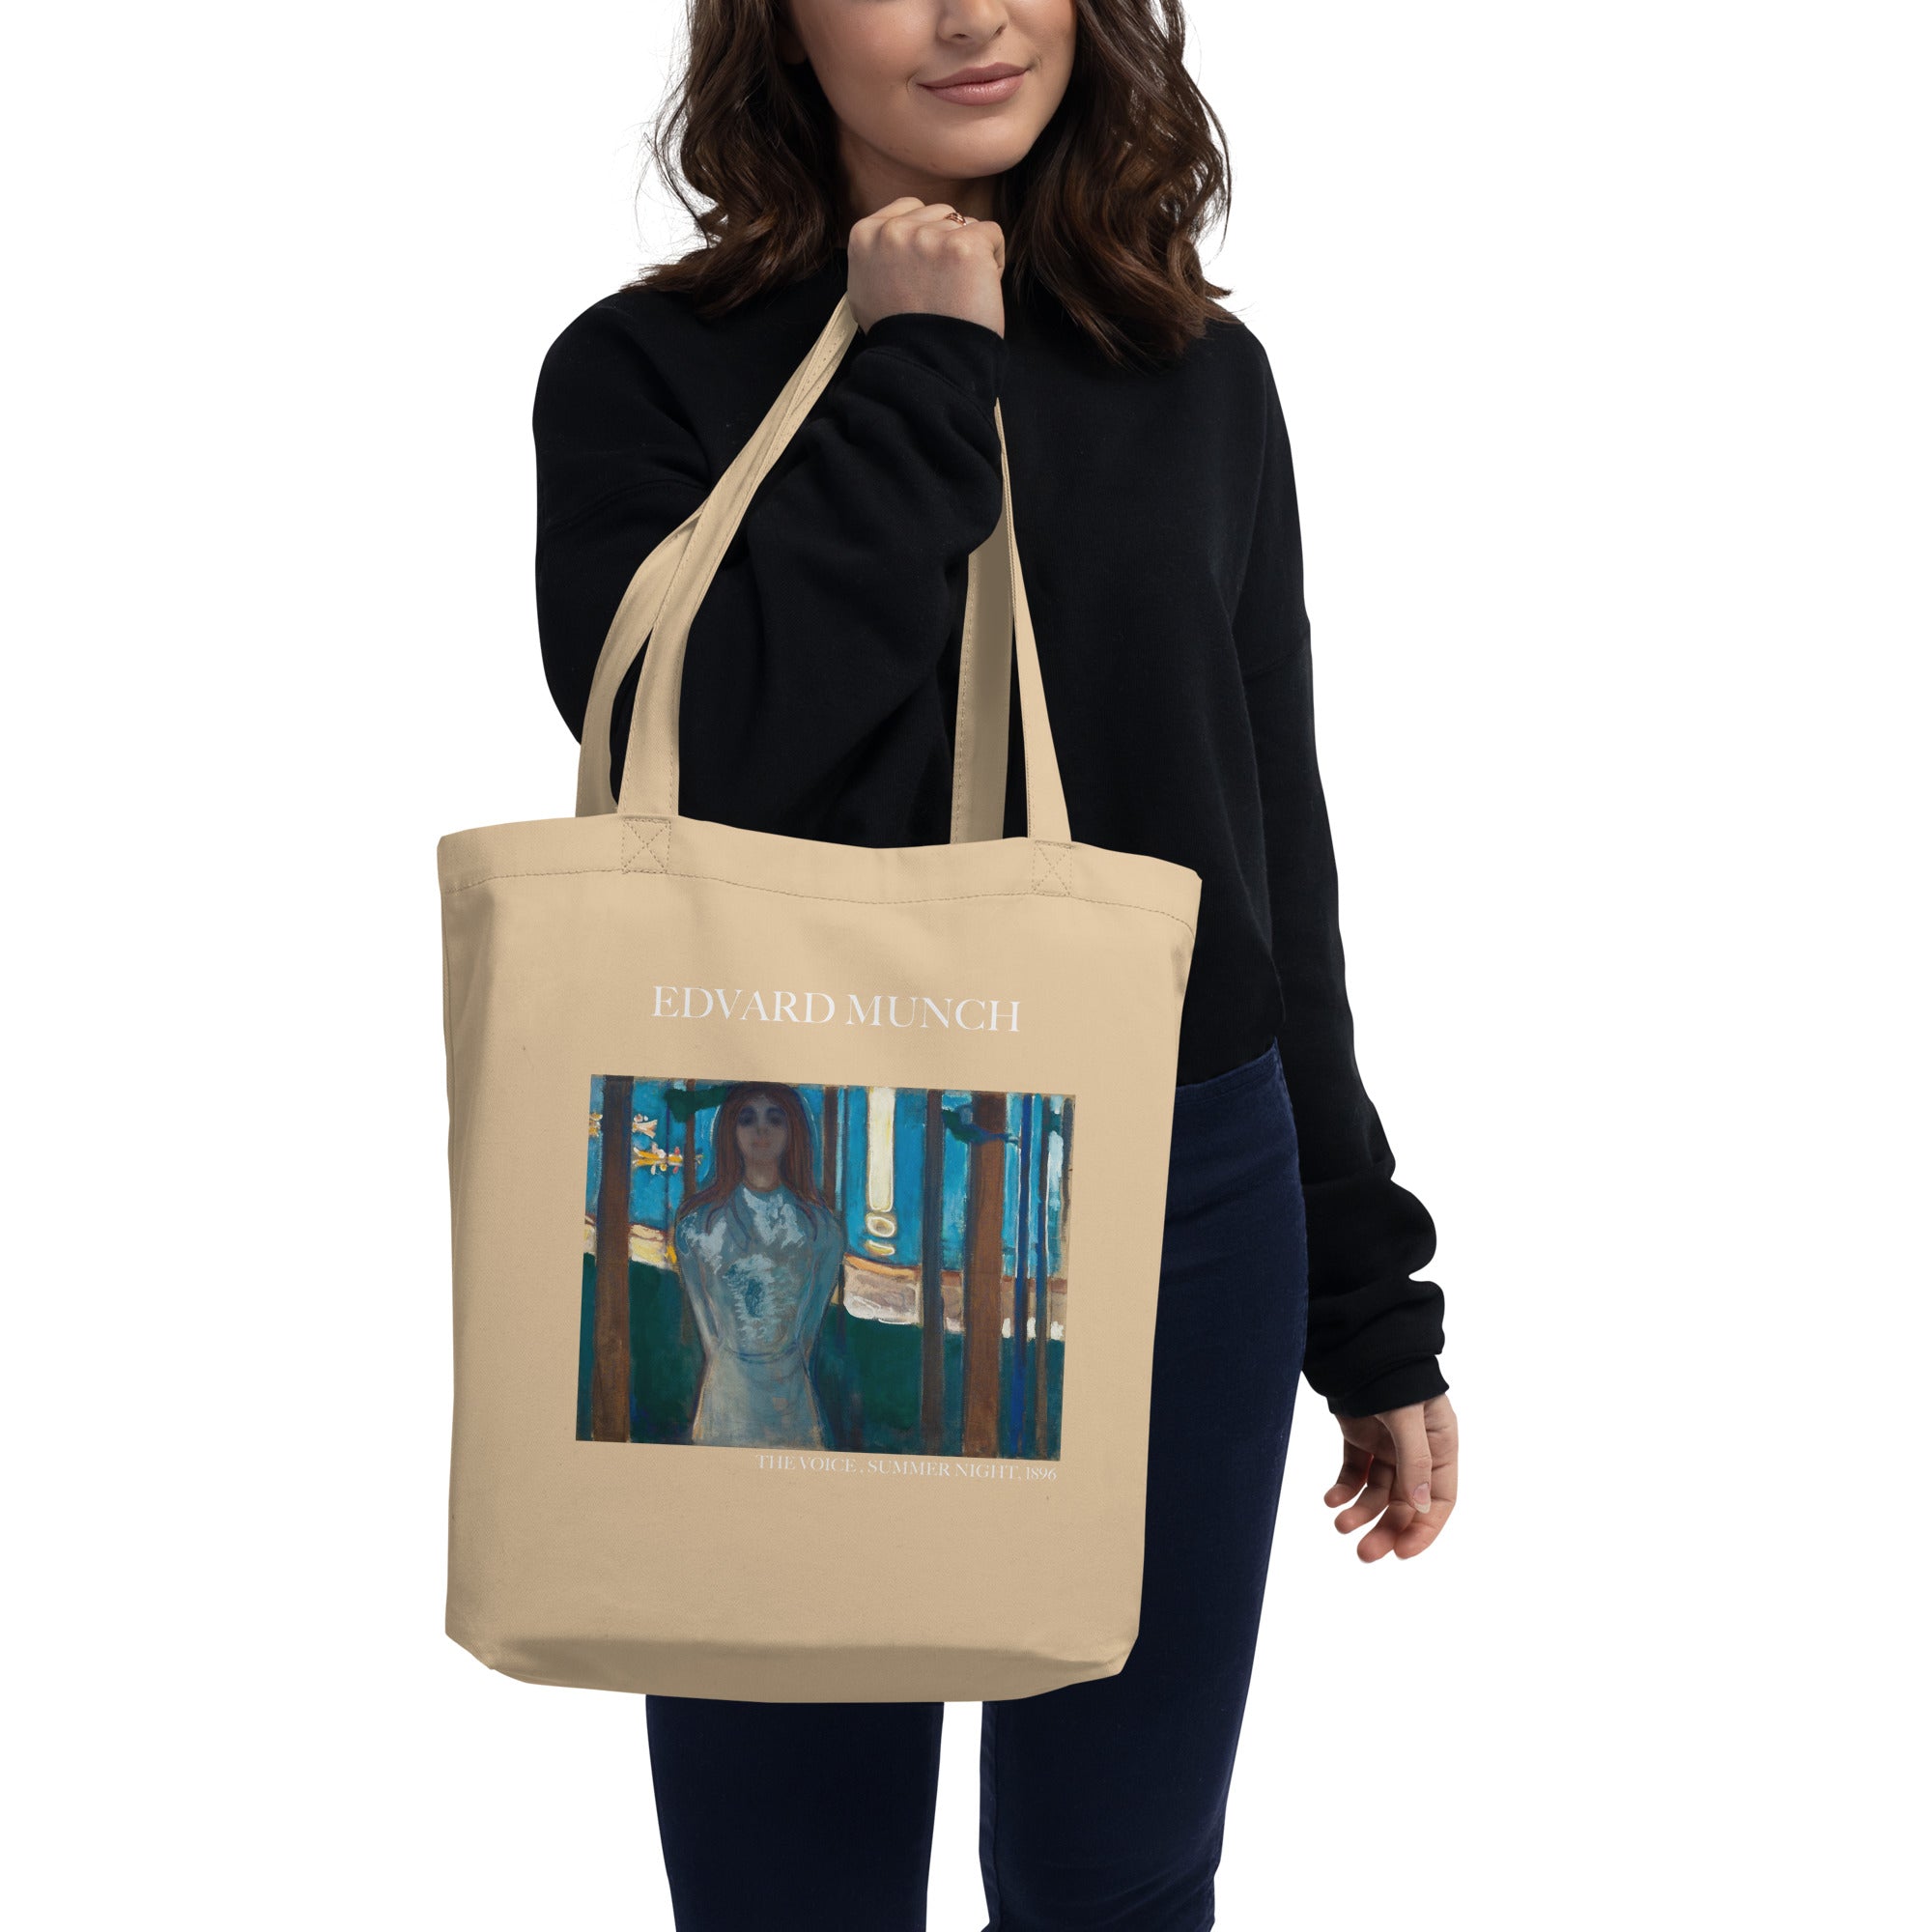 Edvard Munch 'The Voice, Summer Night' Famous Painting Totebag | Eco Friendly Art Tote Bag